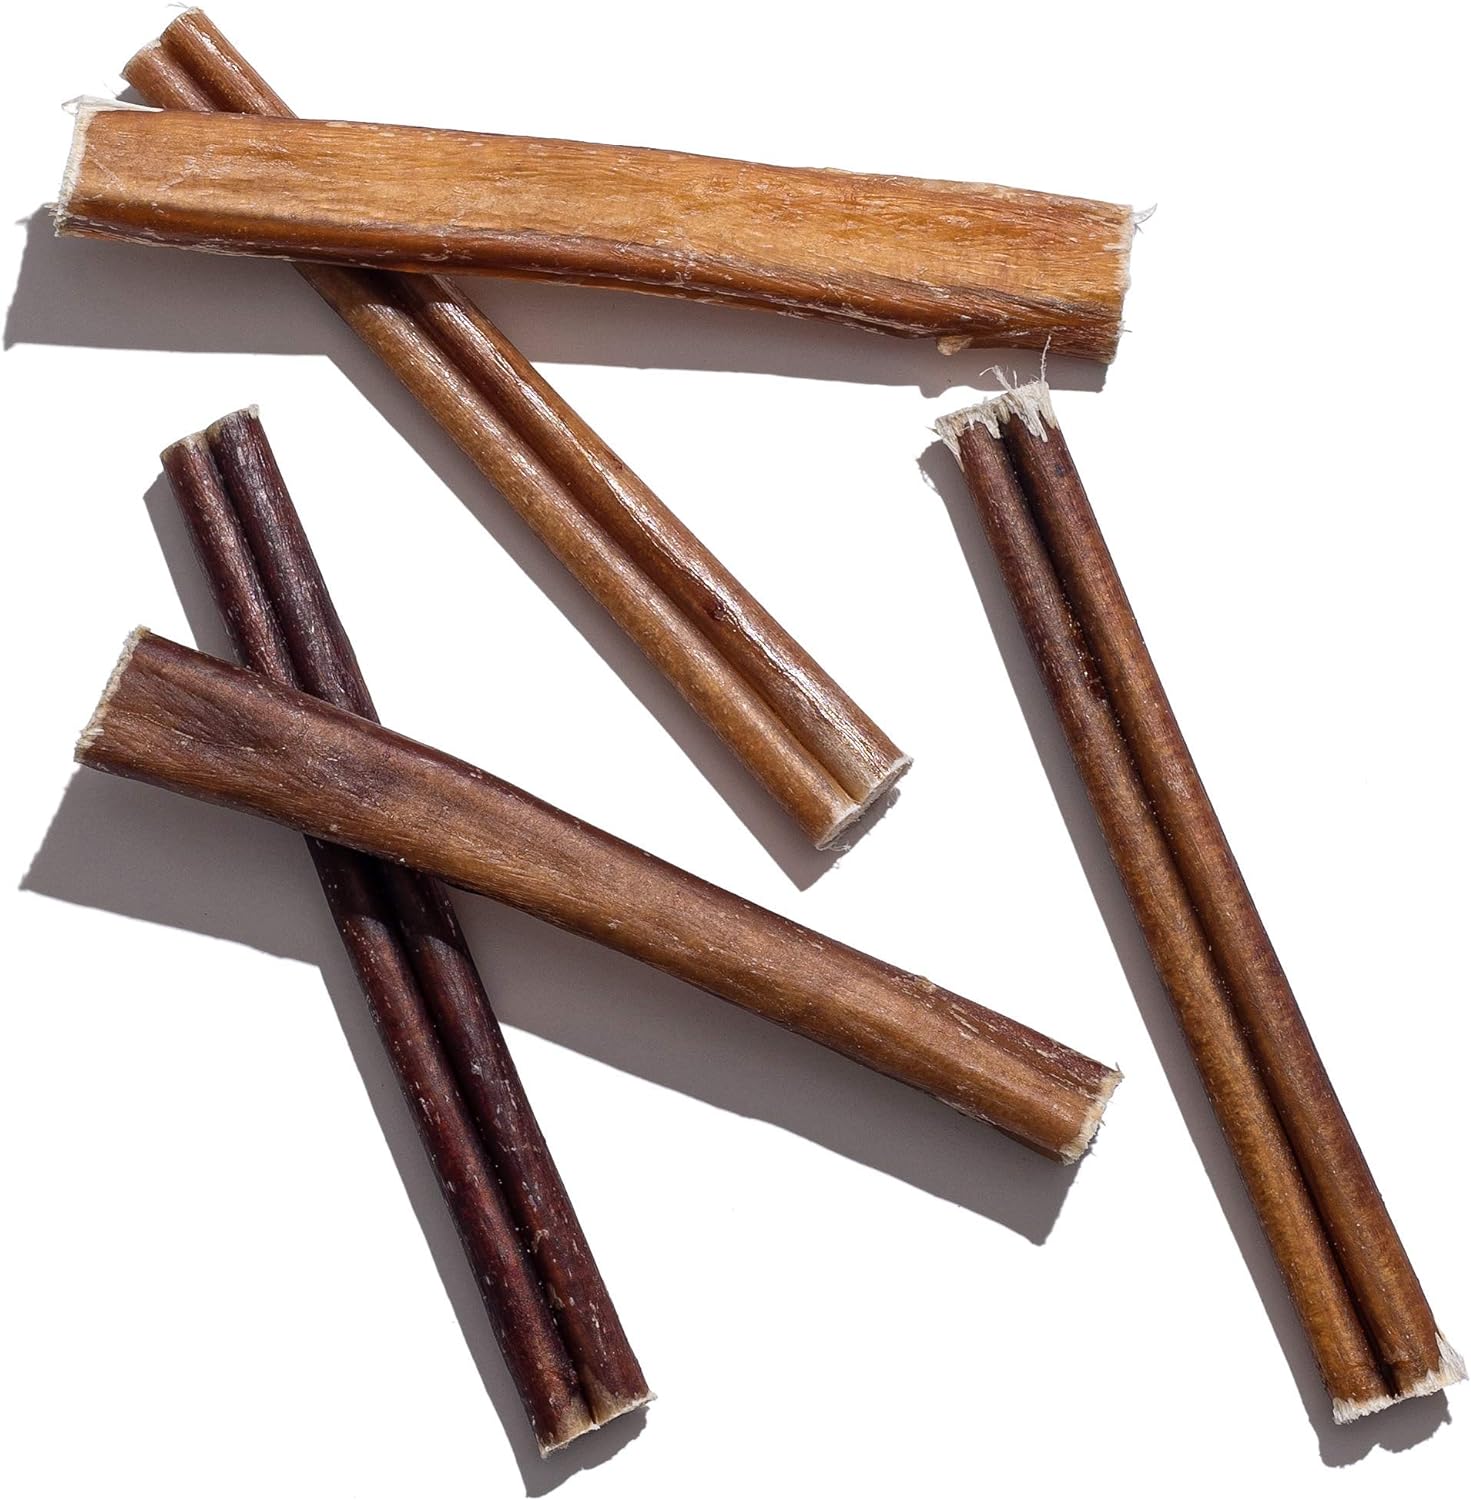 Jack&Pup 6" Thick Bully Sticks for Medium Dogs, Dog Bully Sticks for Small Dogs, Bully Sticks for Puppies Natural Bully Sticks Odor Free Long Lasting Dog Chews (6 Inch Bully Sticks - Thick (20 Pack)) : Pet Supplies